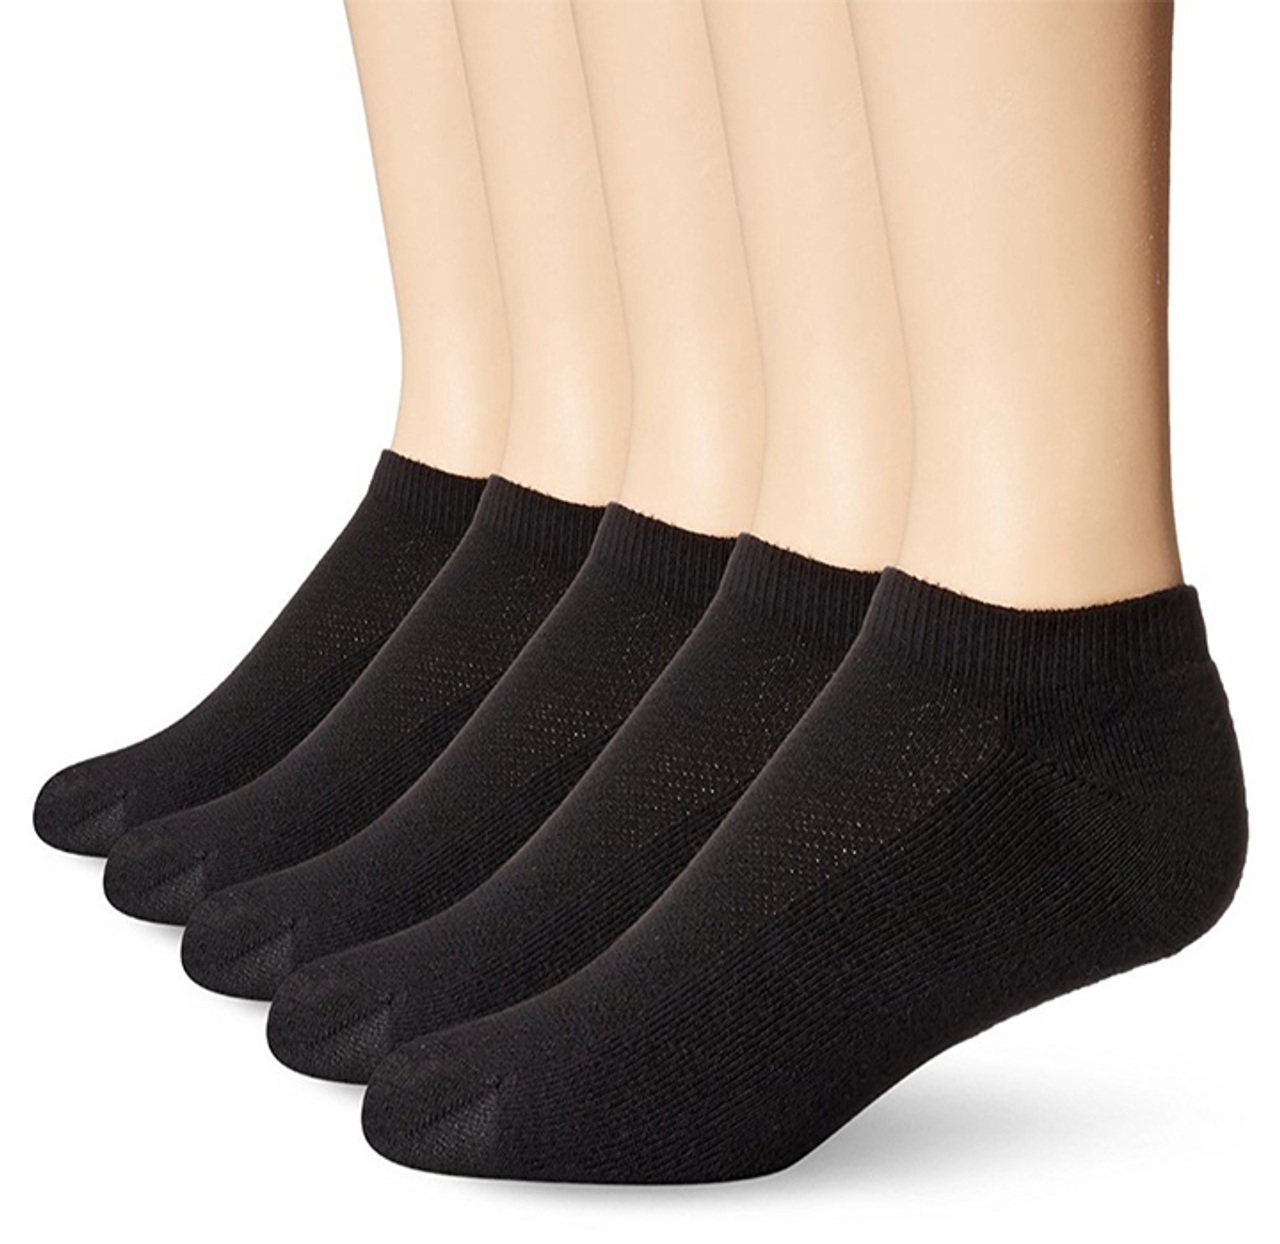 Cotton Unisex Low-Cut No-Show Ankle Socks (12-Pairs) - DailySteals